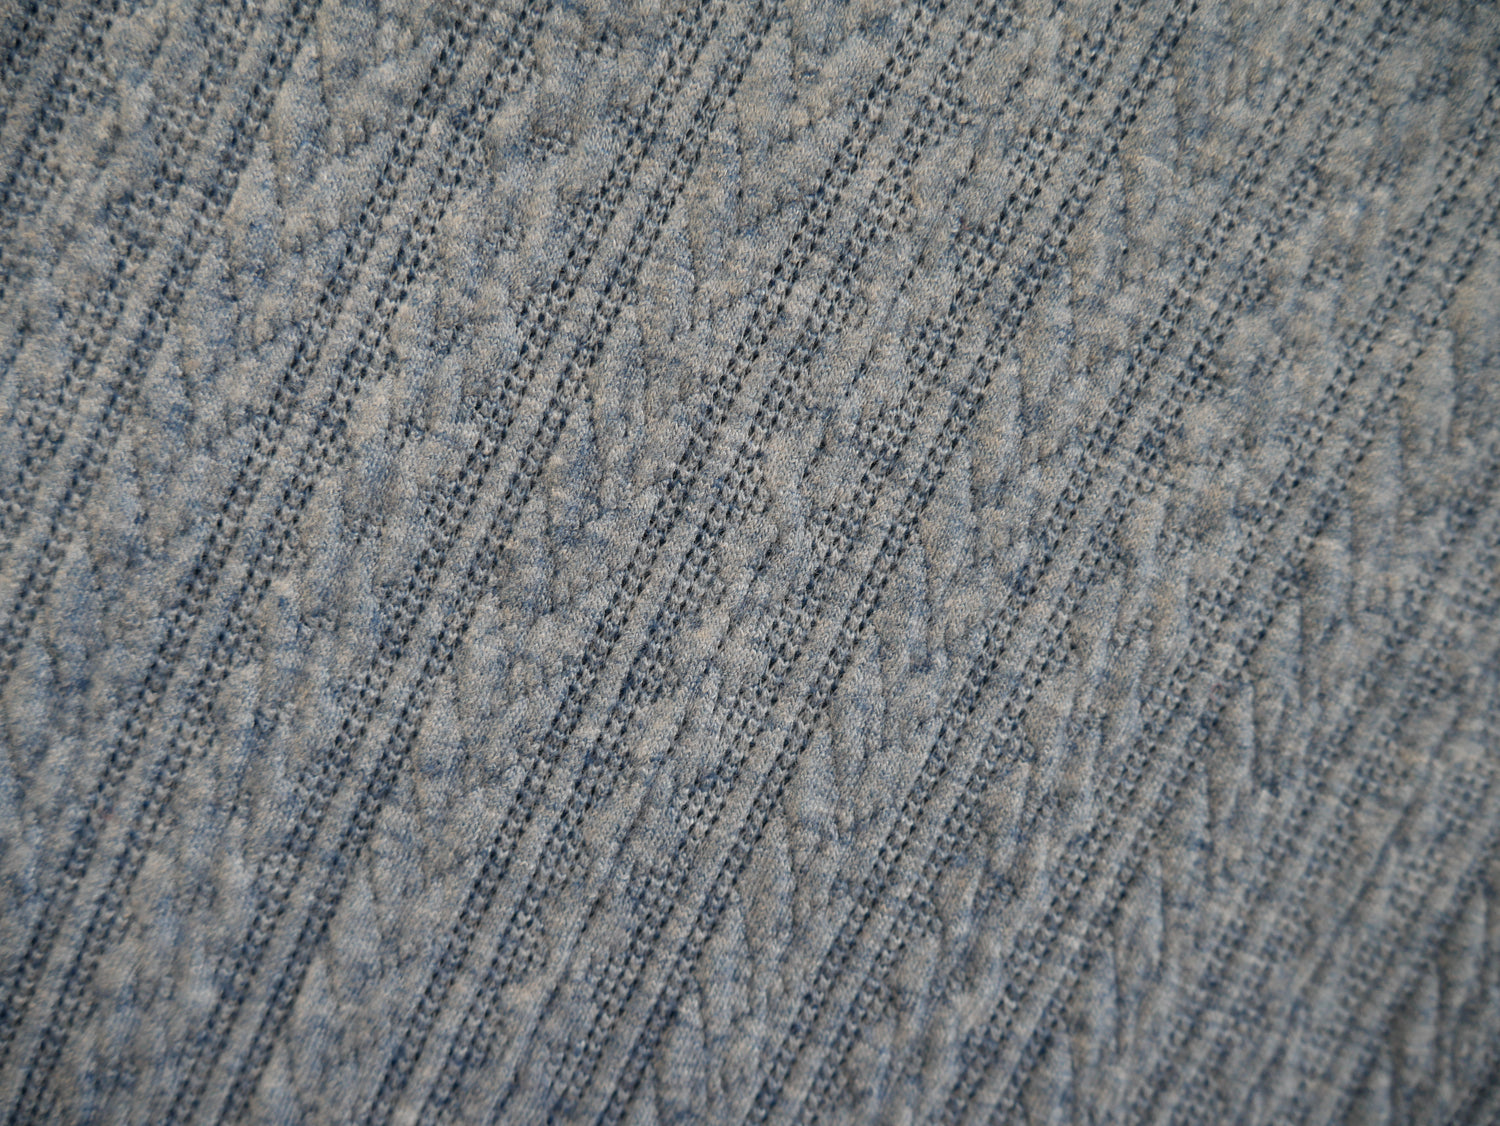 Cable Jacquard Knit Fabric in Blue £19.00-Jersey Fabric-Flying Bobbins Haberdashery